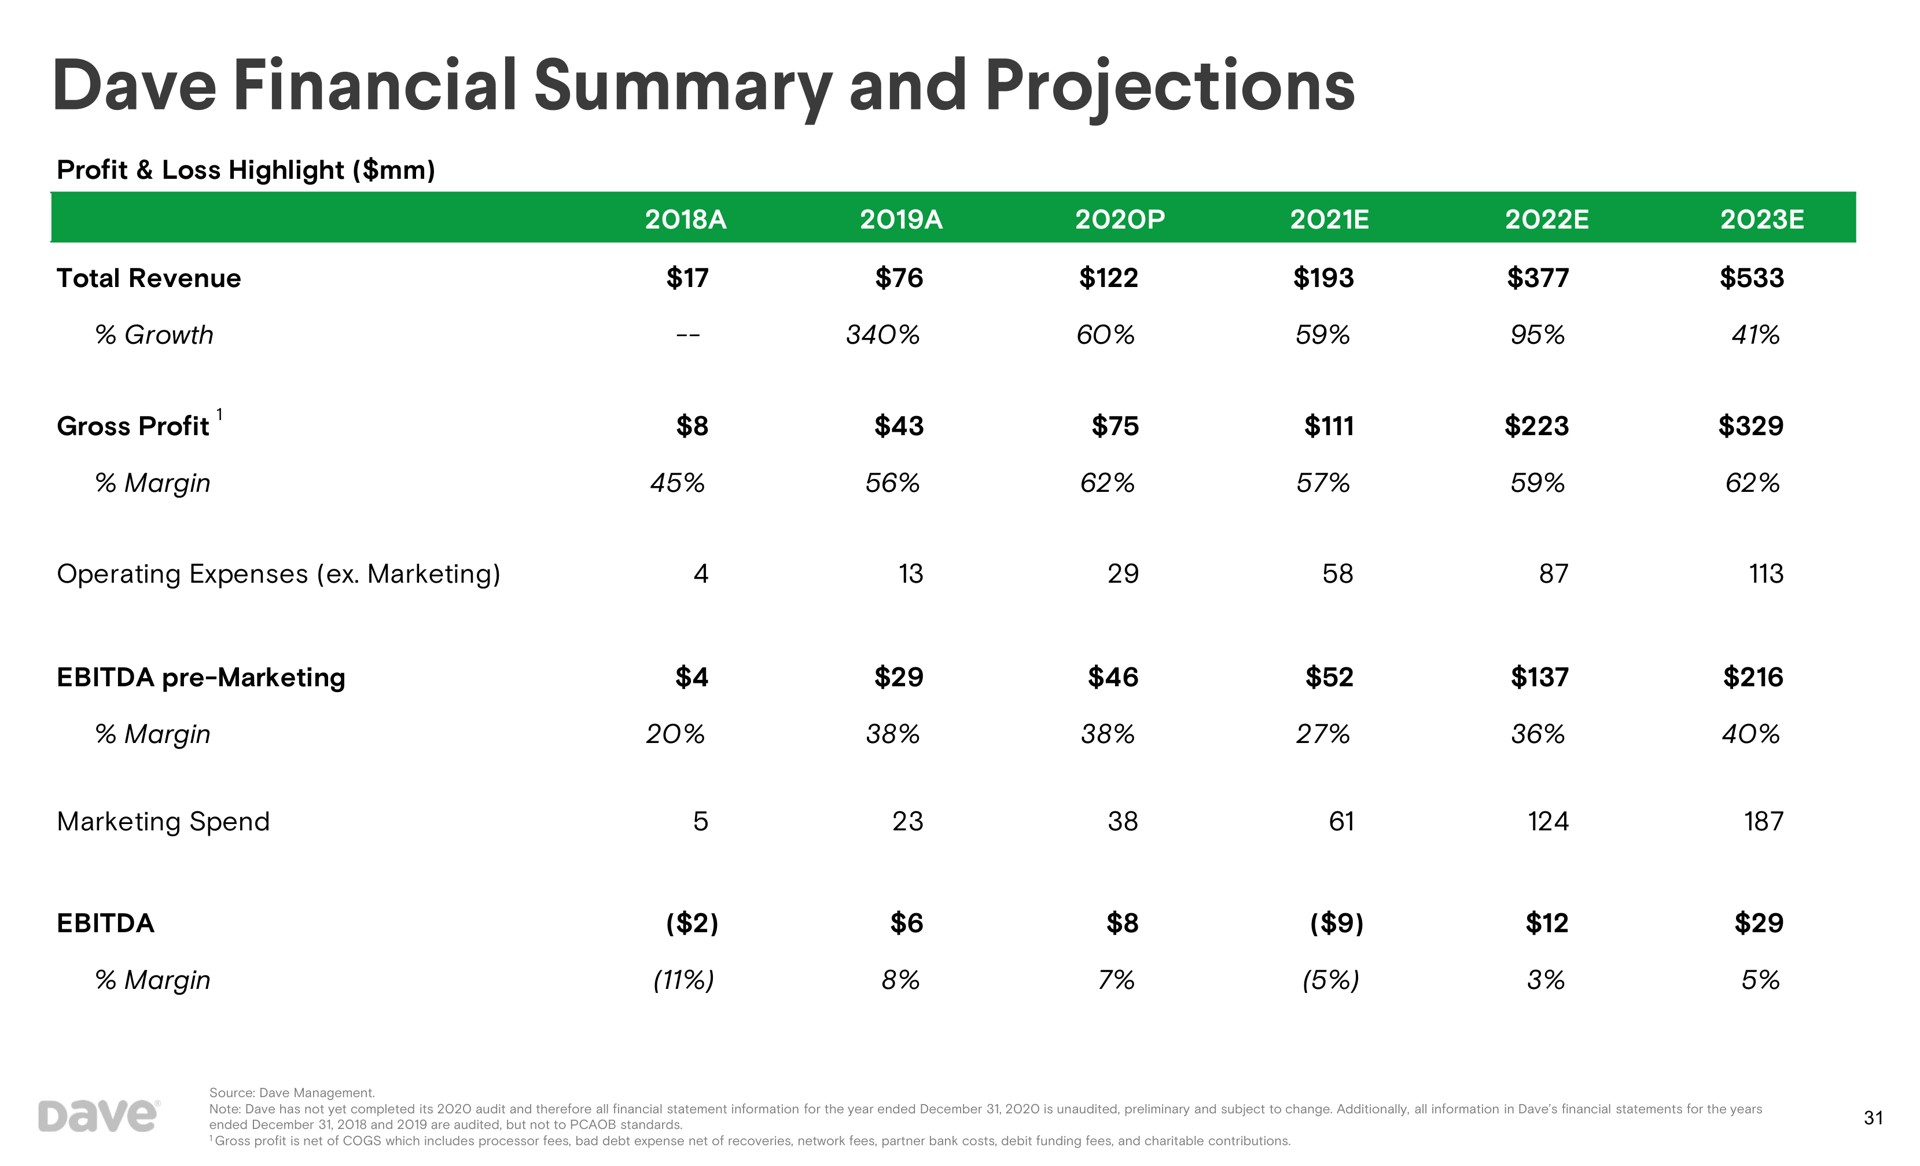 financial summary and projections | Dave